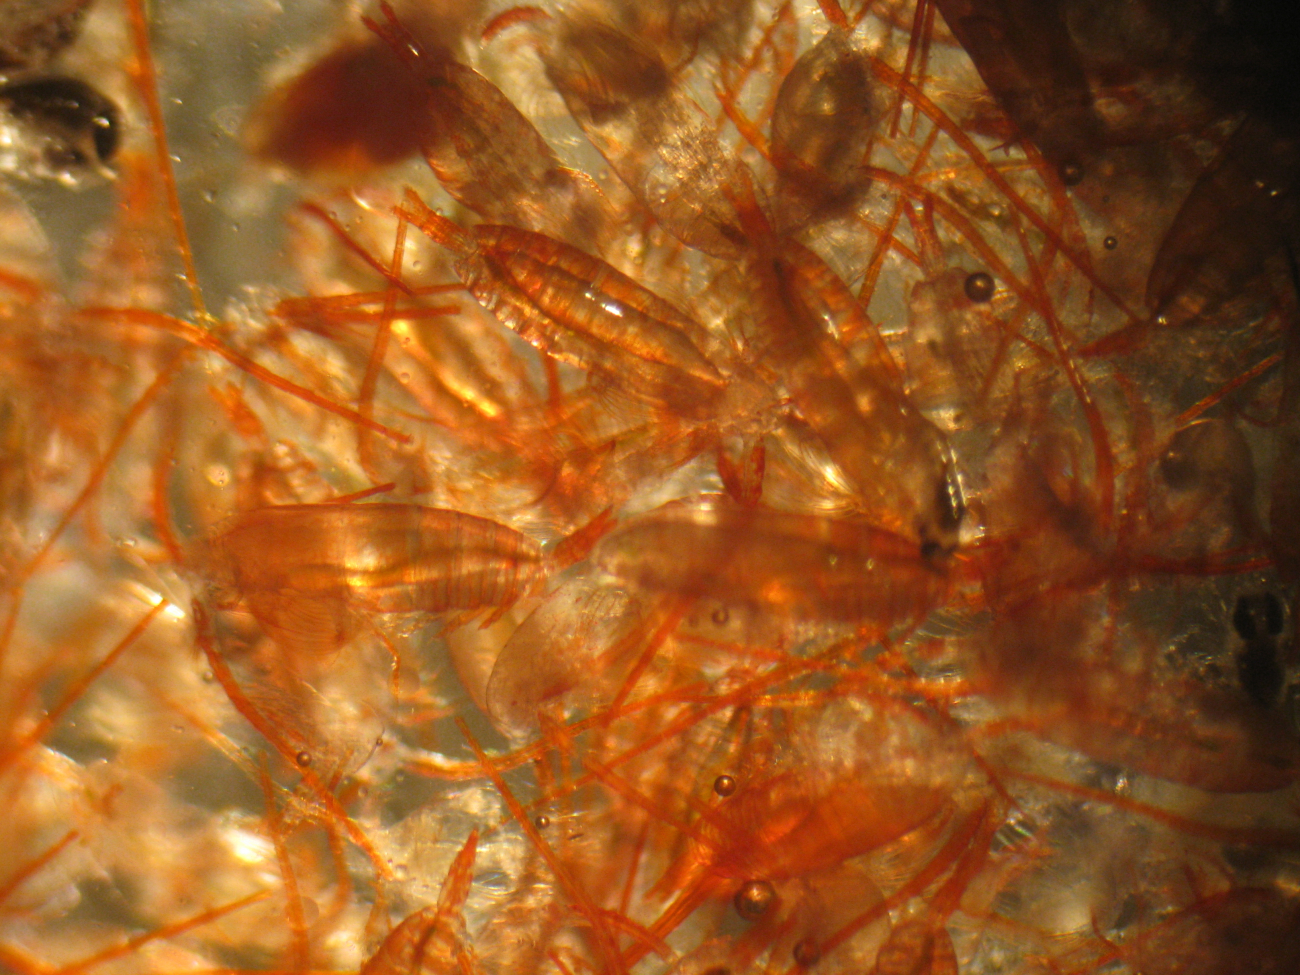 Through the microscope - copepods and krill